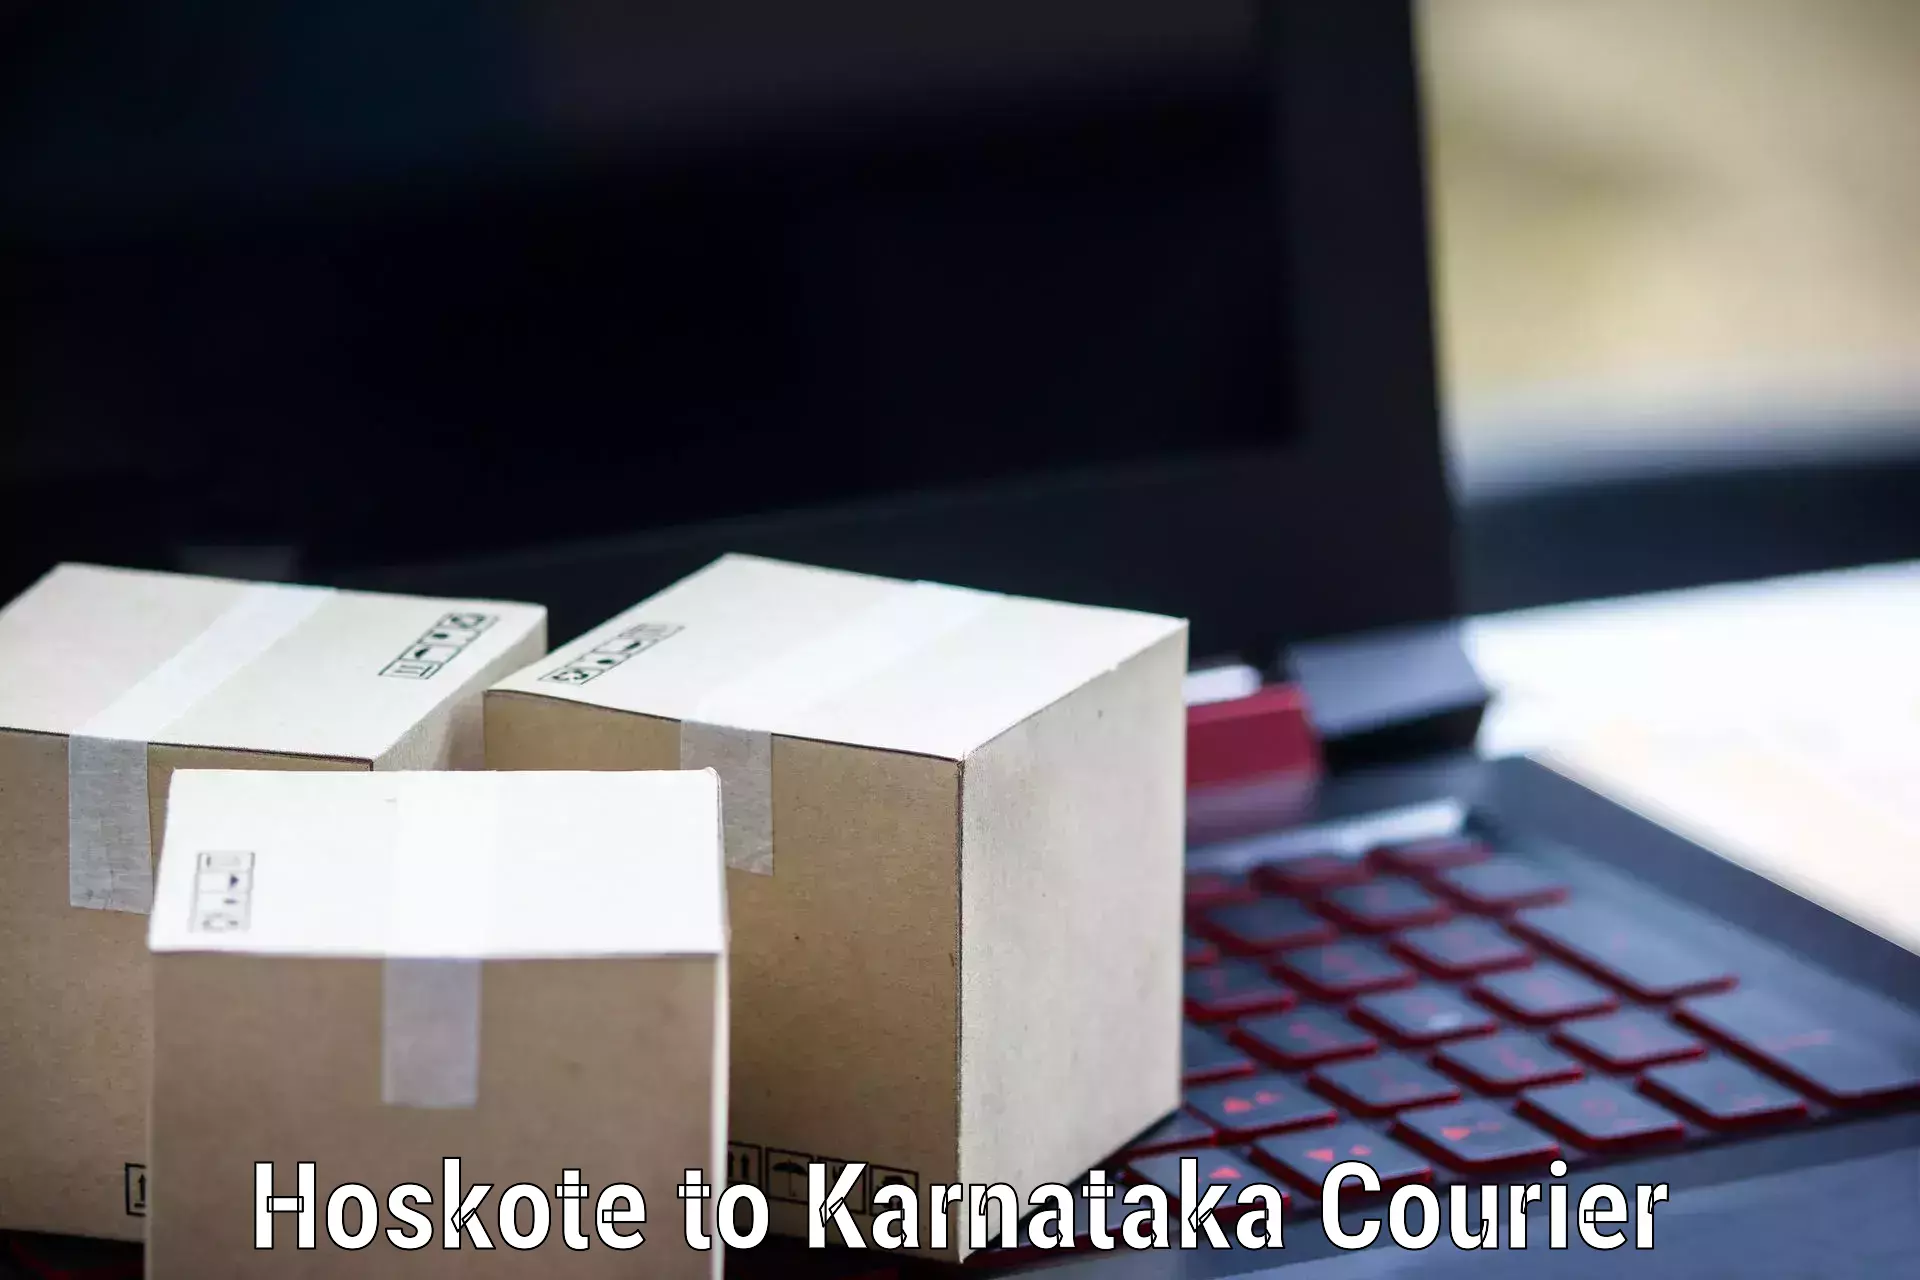 Reliable parcel services in Hoskote to Yelburga